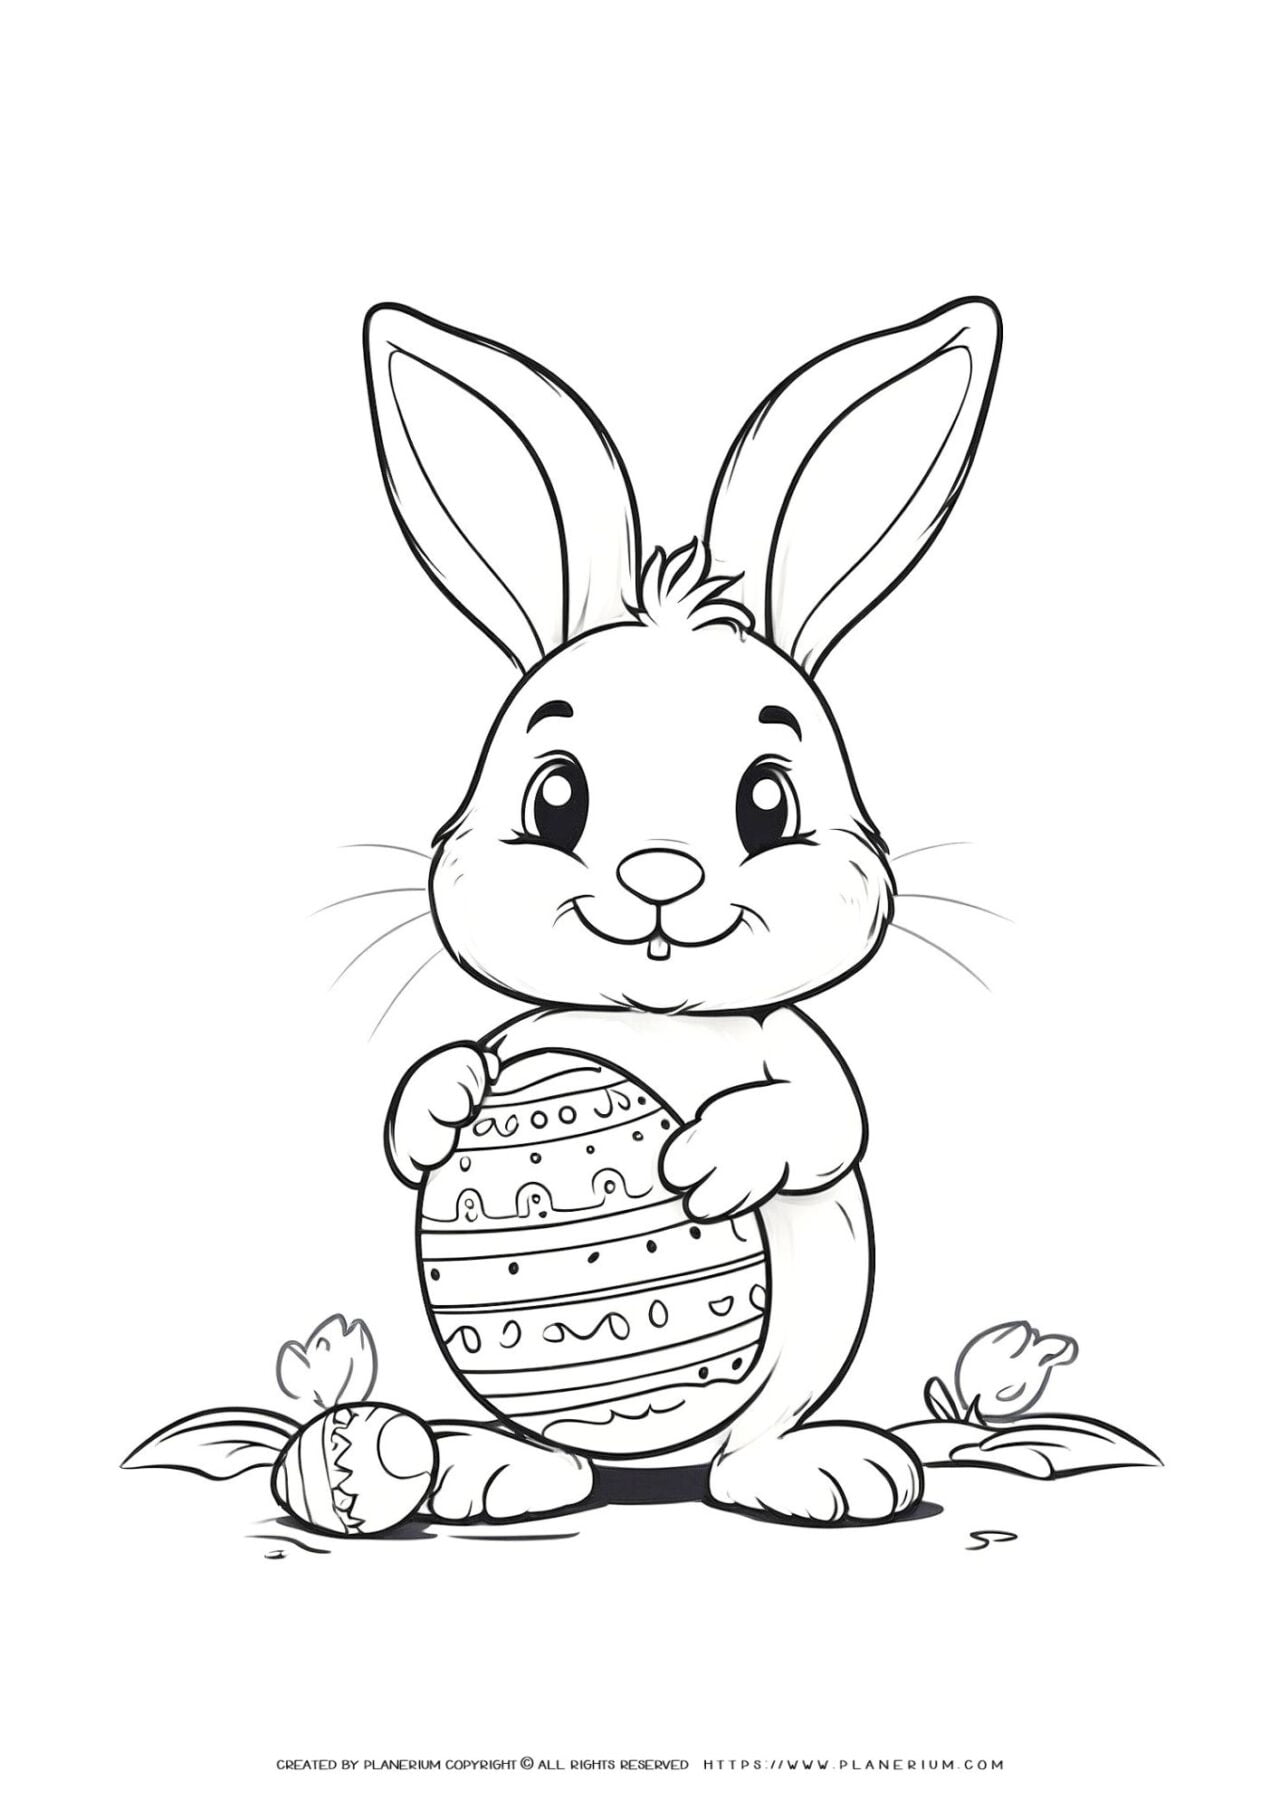 Cartoon bunny with decorated Easter egg.